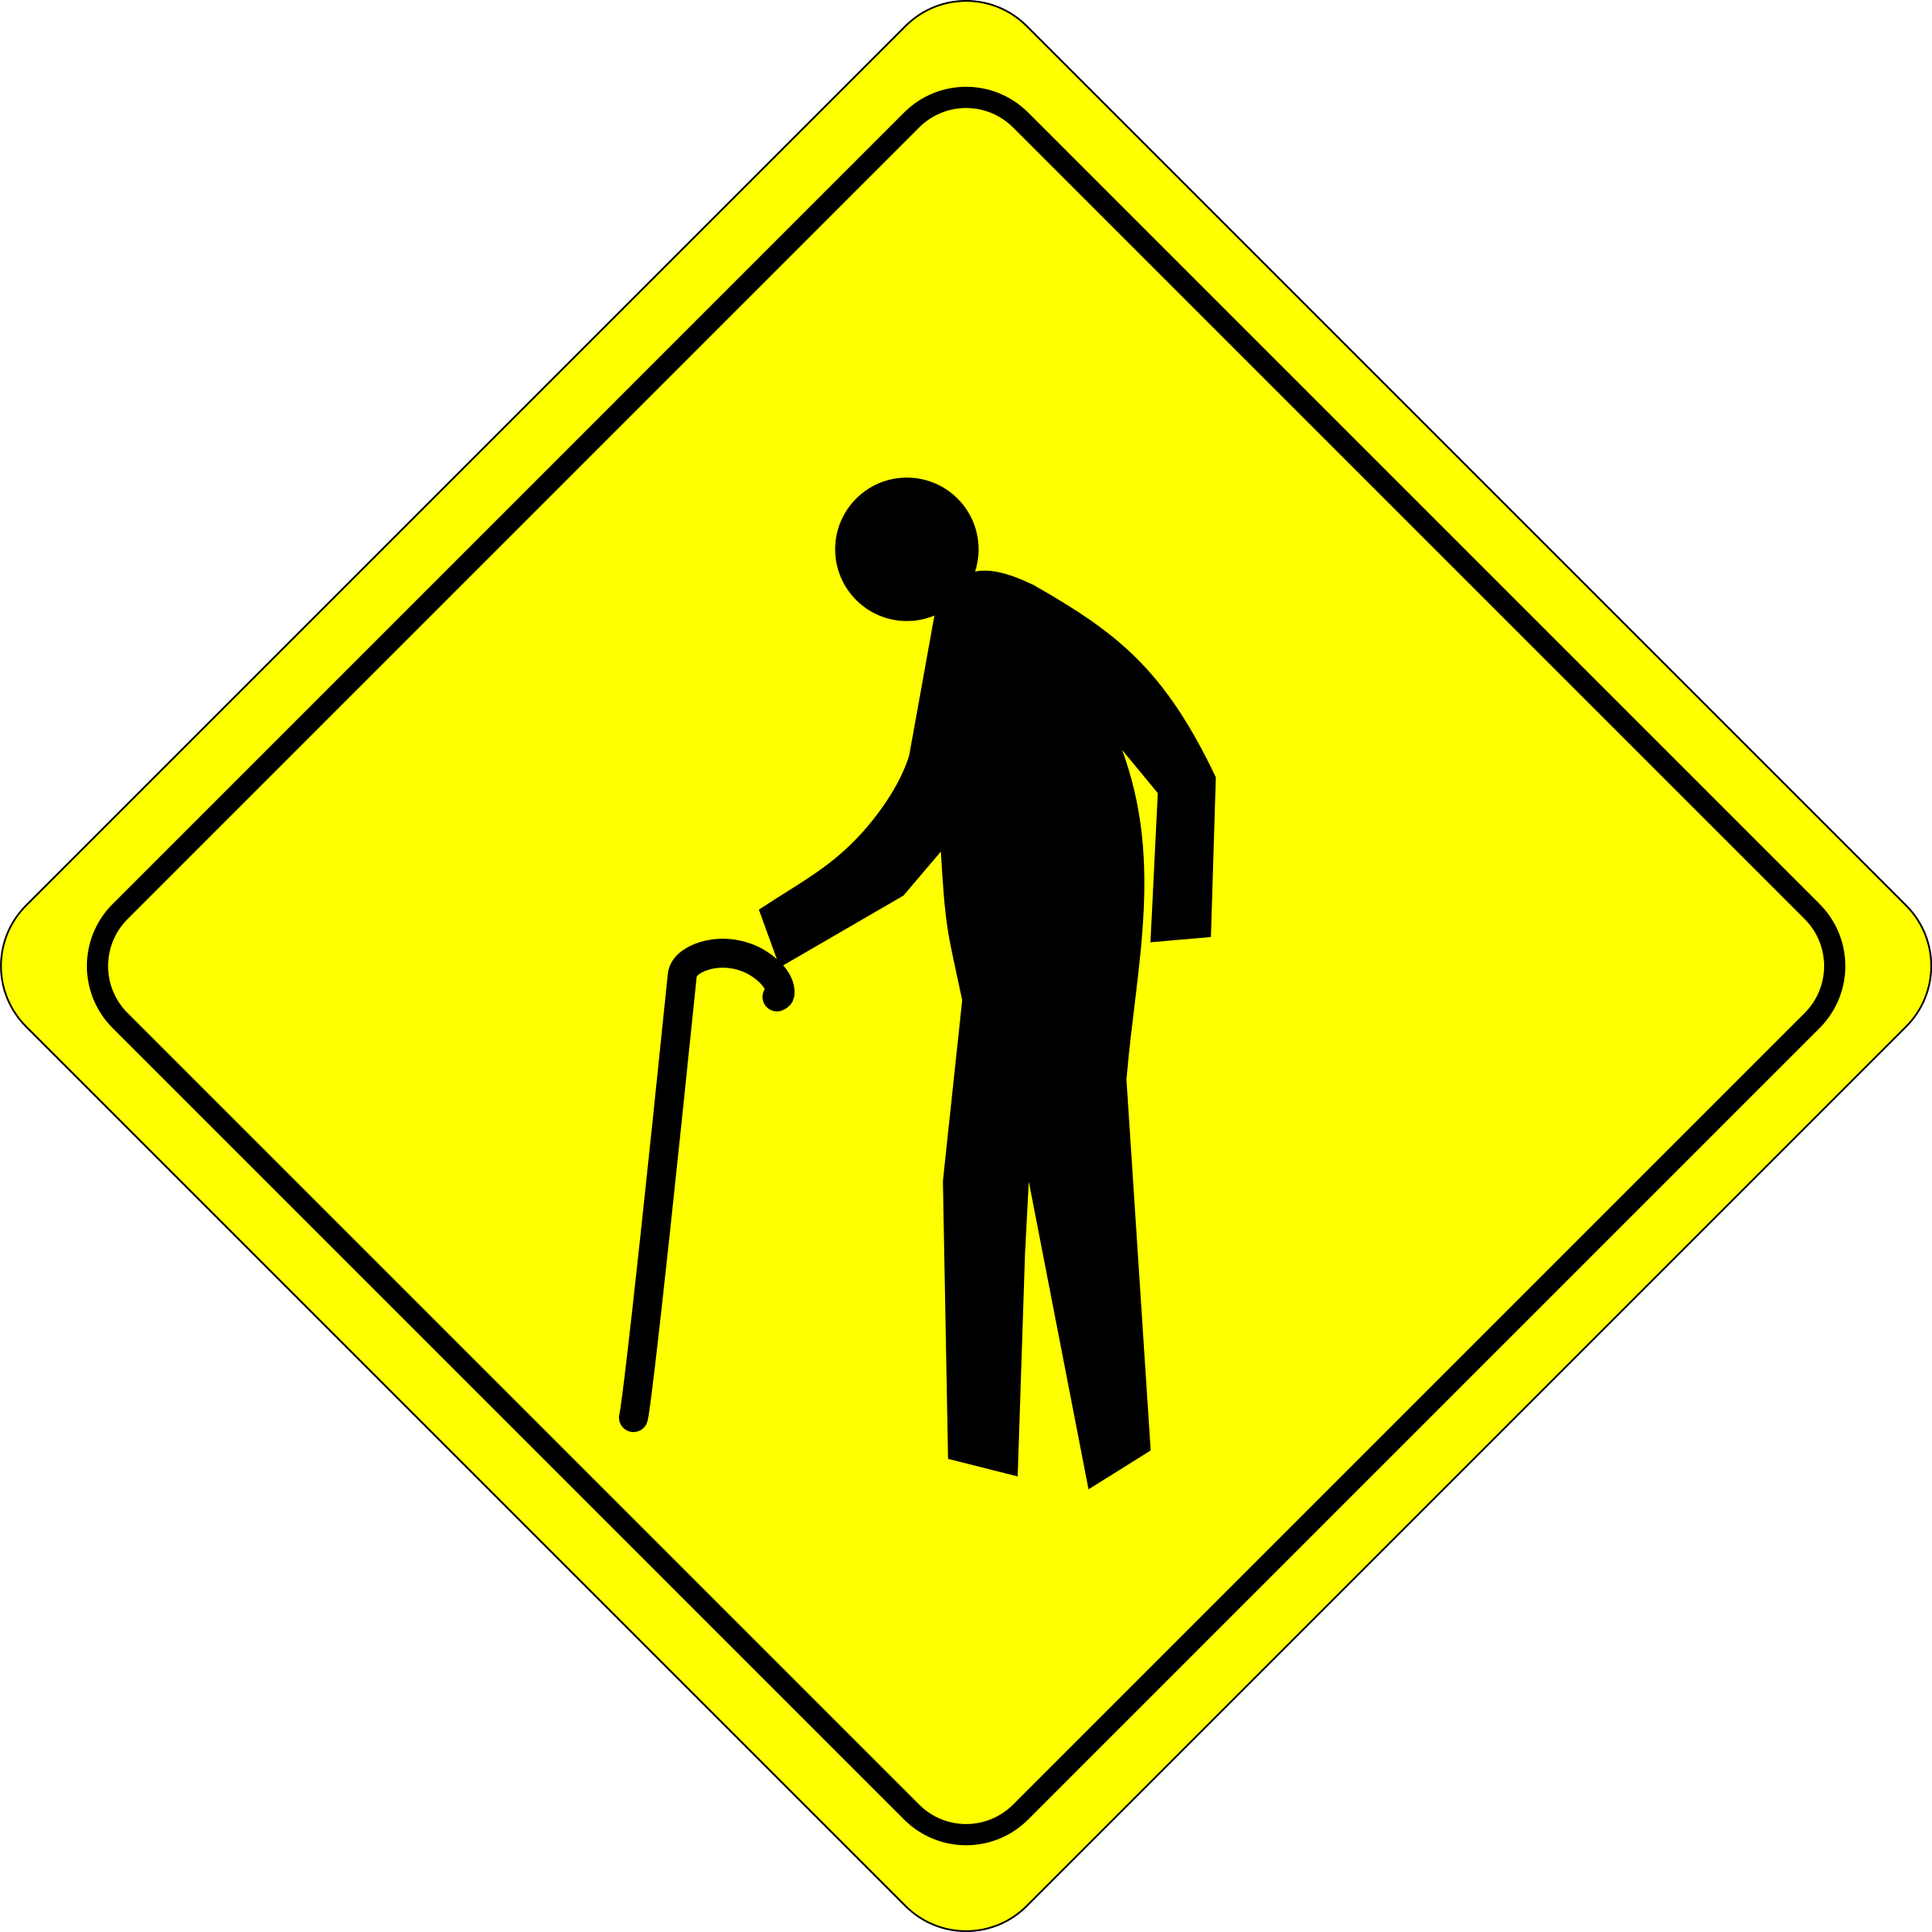 Adult Birthday Party - Old Person Crossing Sign (2400x2400)